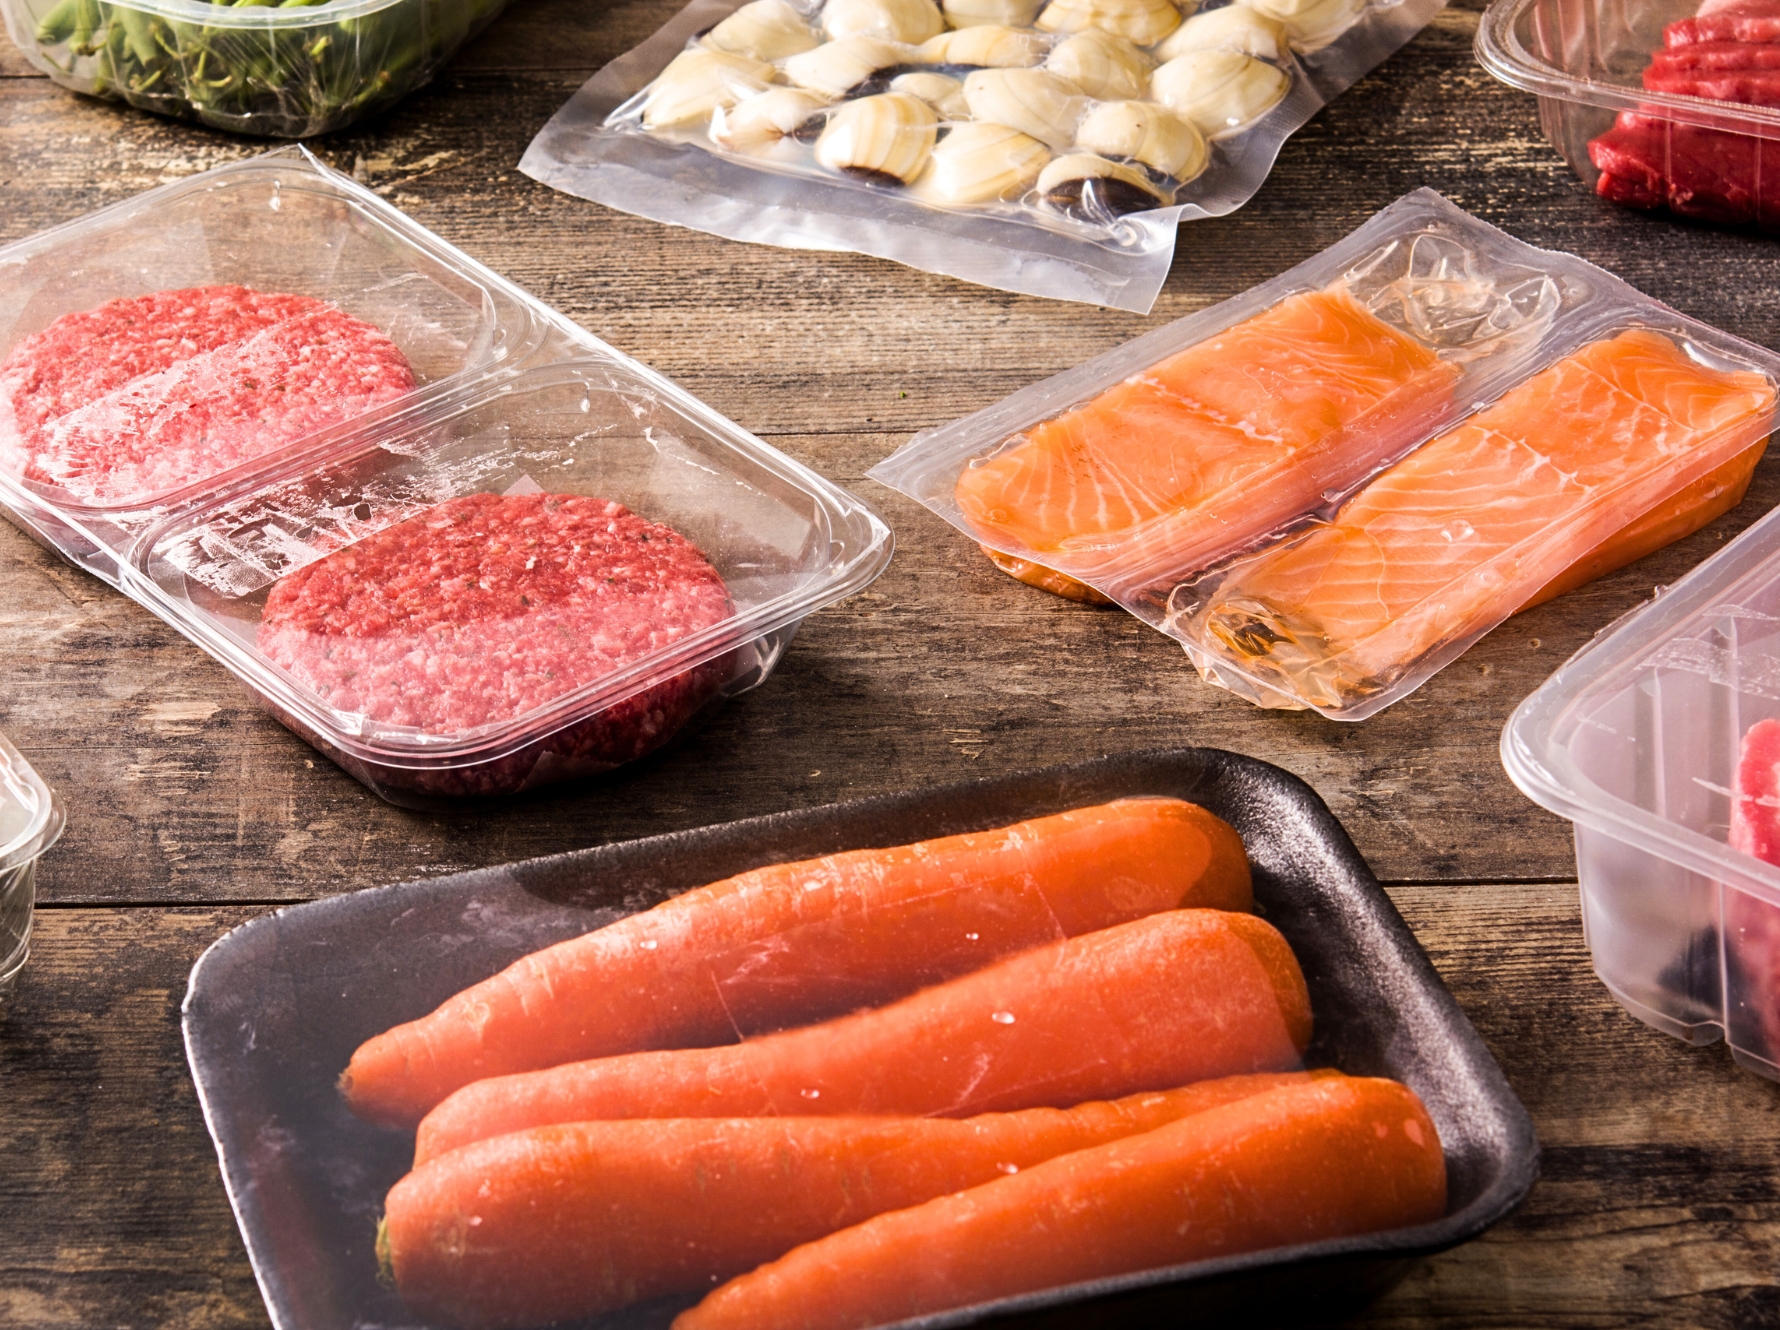 Different types of sustainably packaged food. Meat, green neas, carrots, and salmon on a wooden table.